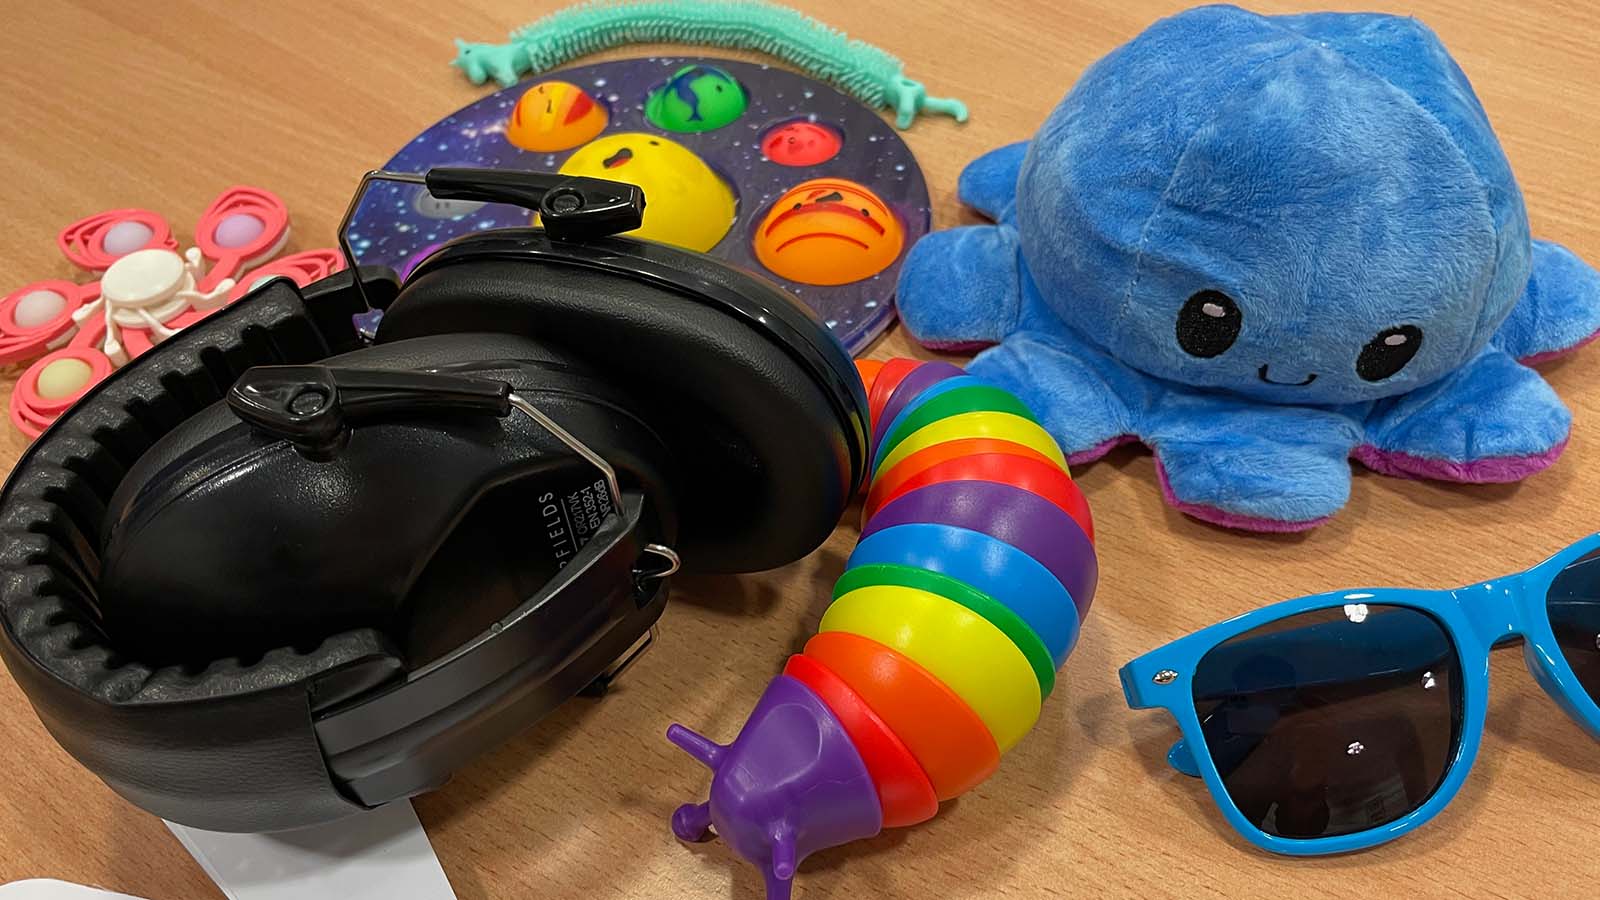 An example of the contents found in the Techniquest sensory bags.